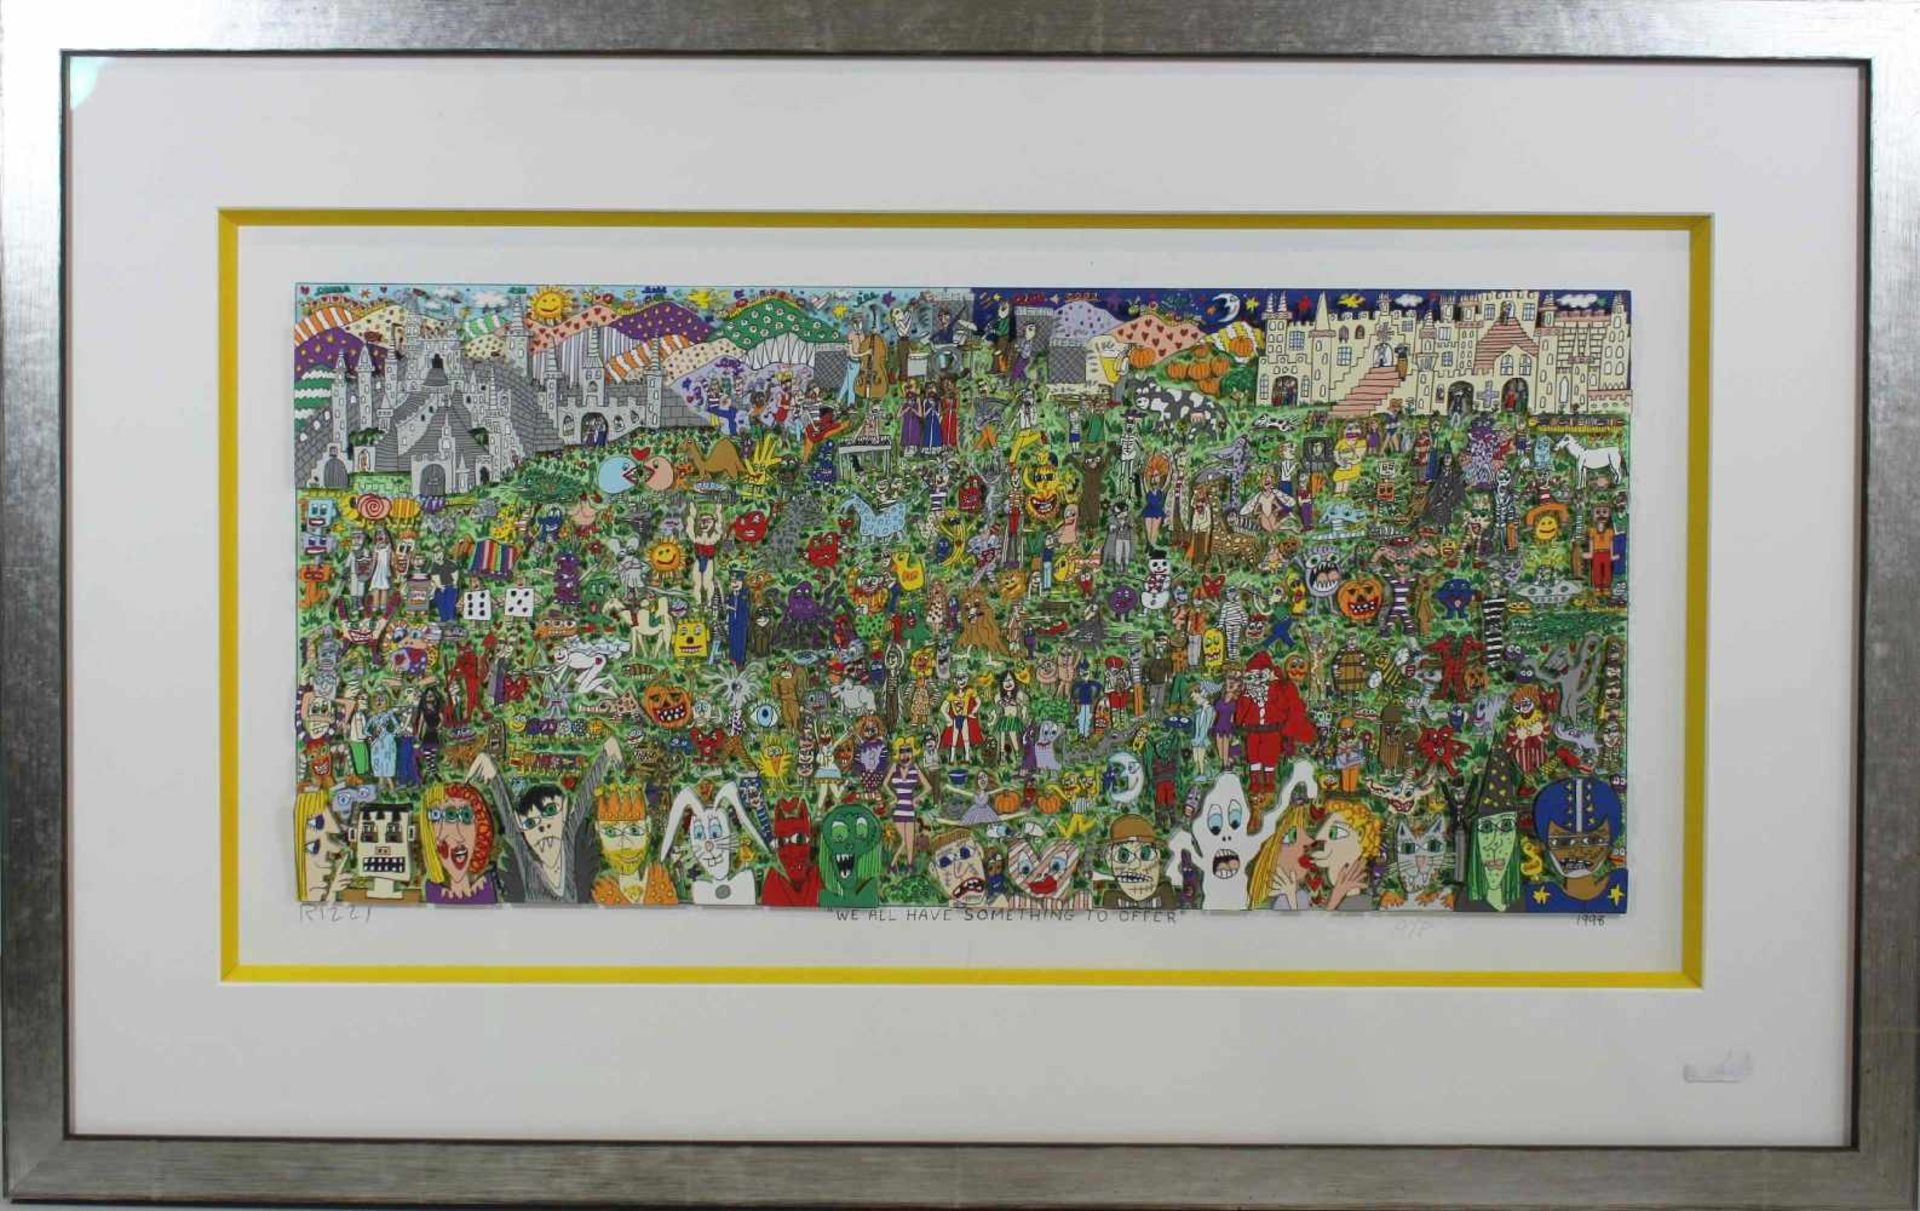 James Rizzi (1950 - 2011), We all have something to offer, 1998, 3-D Lithografie in Farbe, im - Bild 2 aus 3